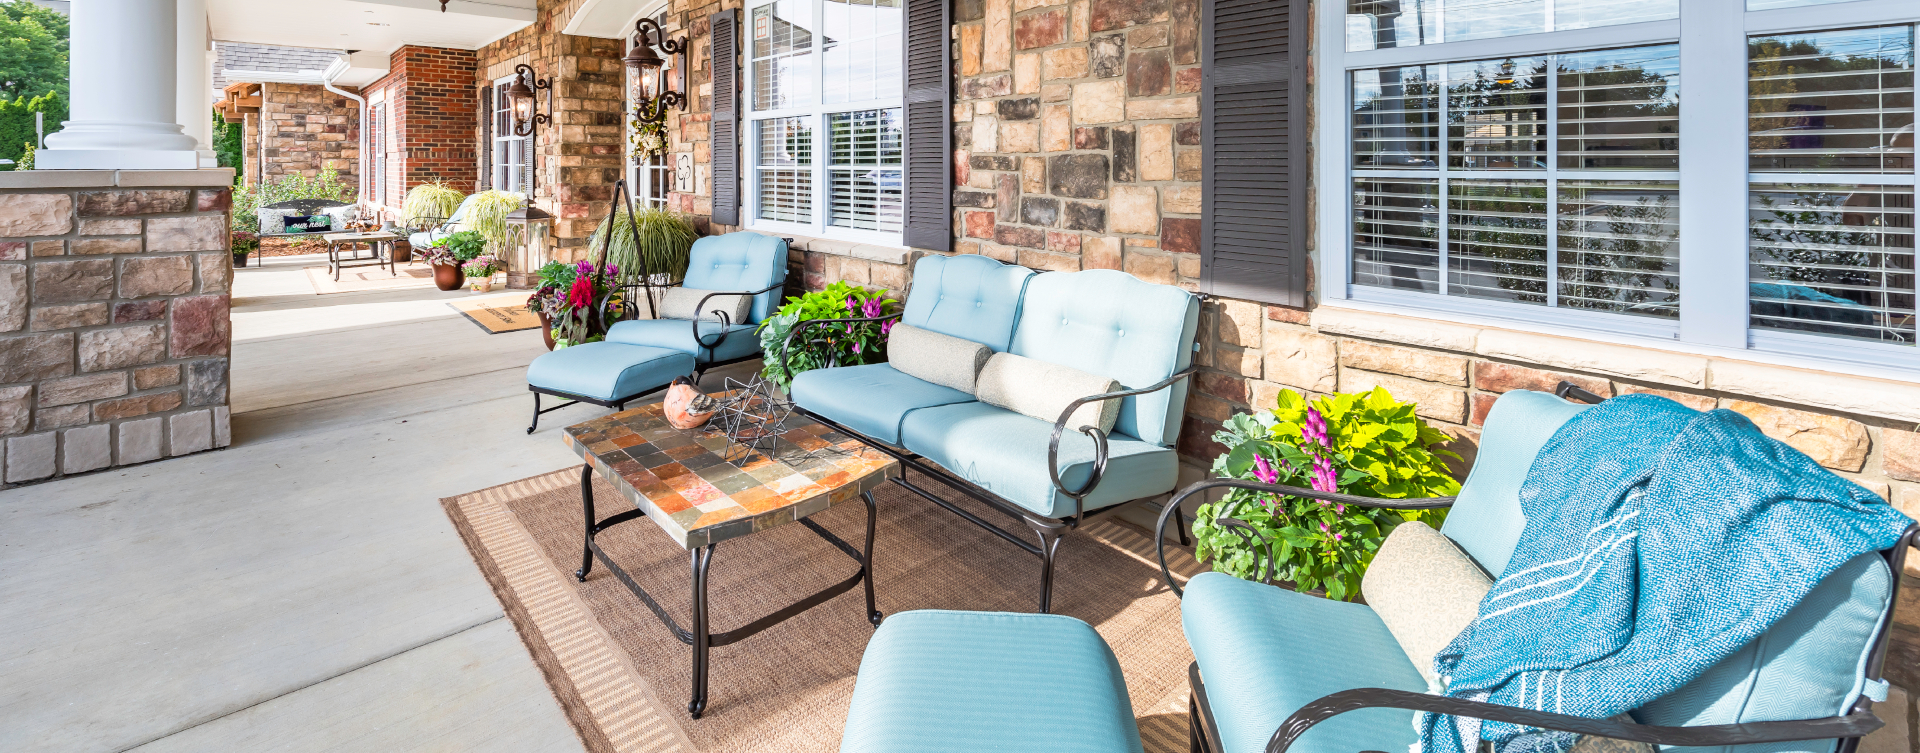 Enjoy conversations with friends on the porch at Bickford of Shelby Township